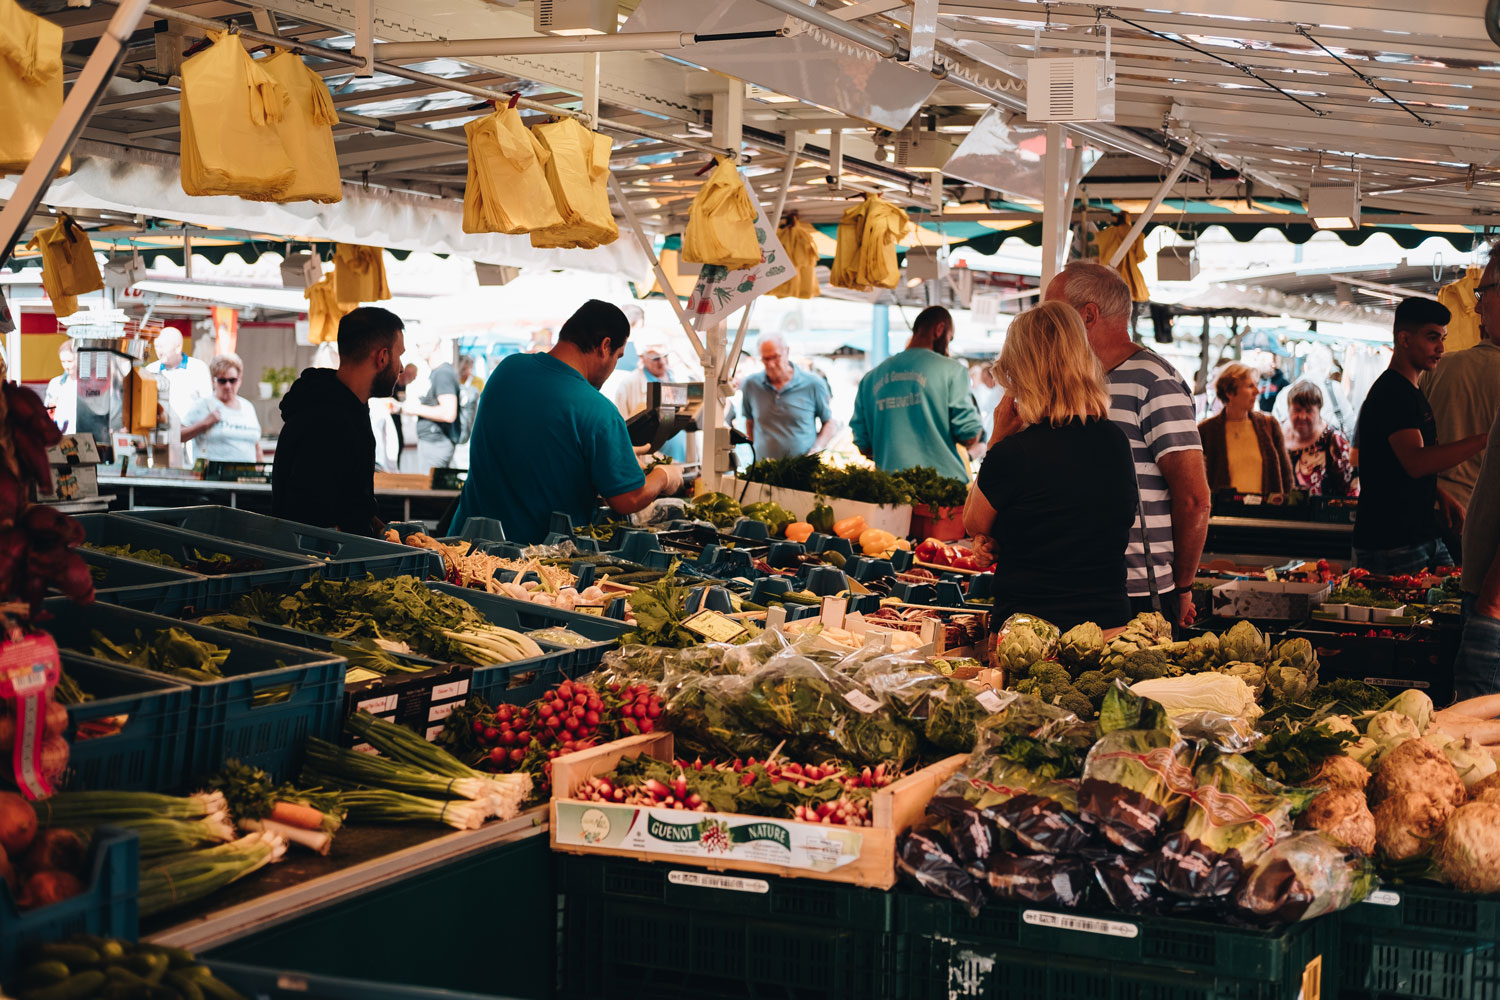 A fruit and vegetable stand in a busy market. An employee weighs a bag.